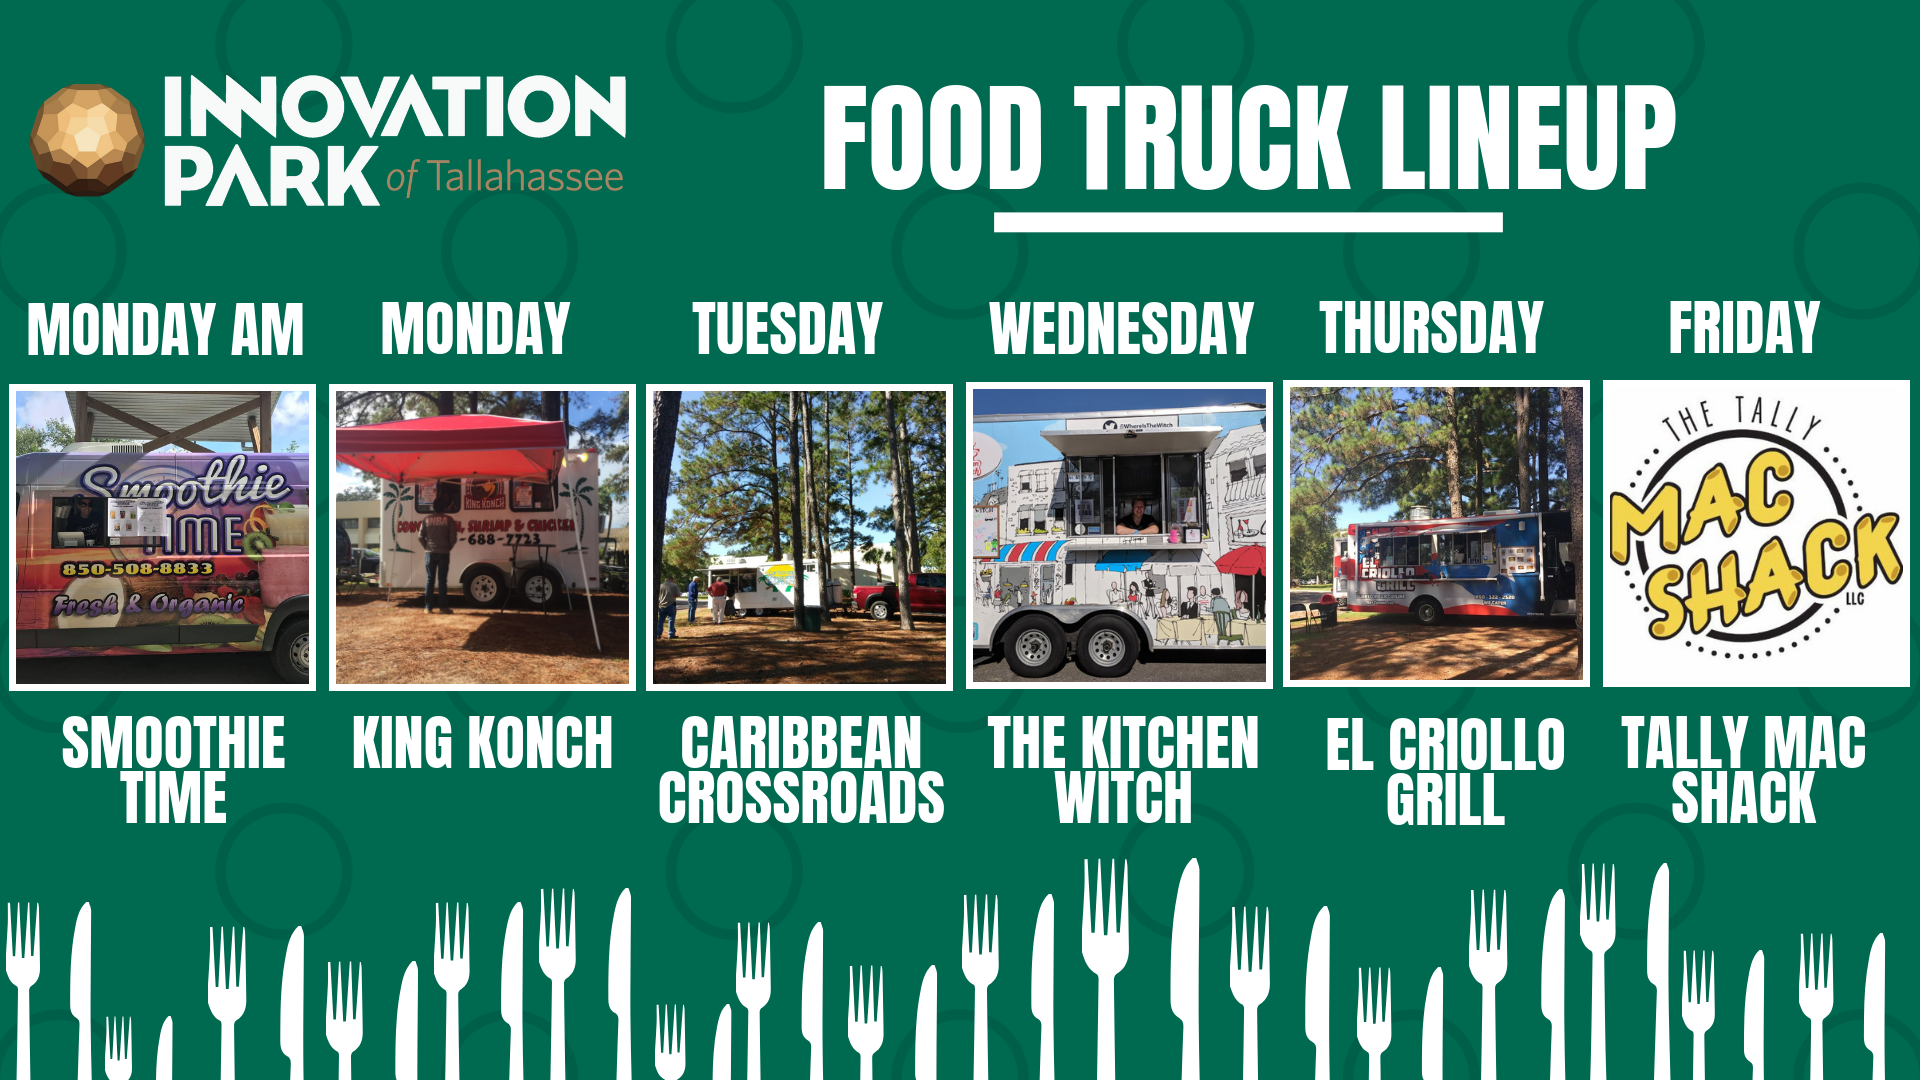 foodtruck updates at Innovation park of tallahassee